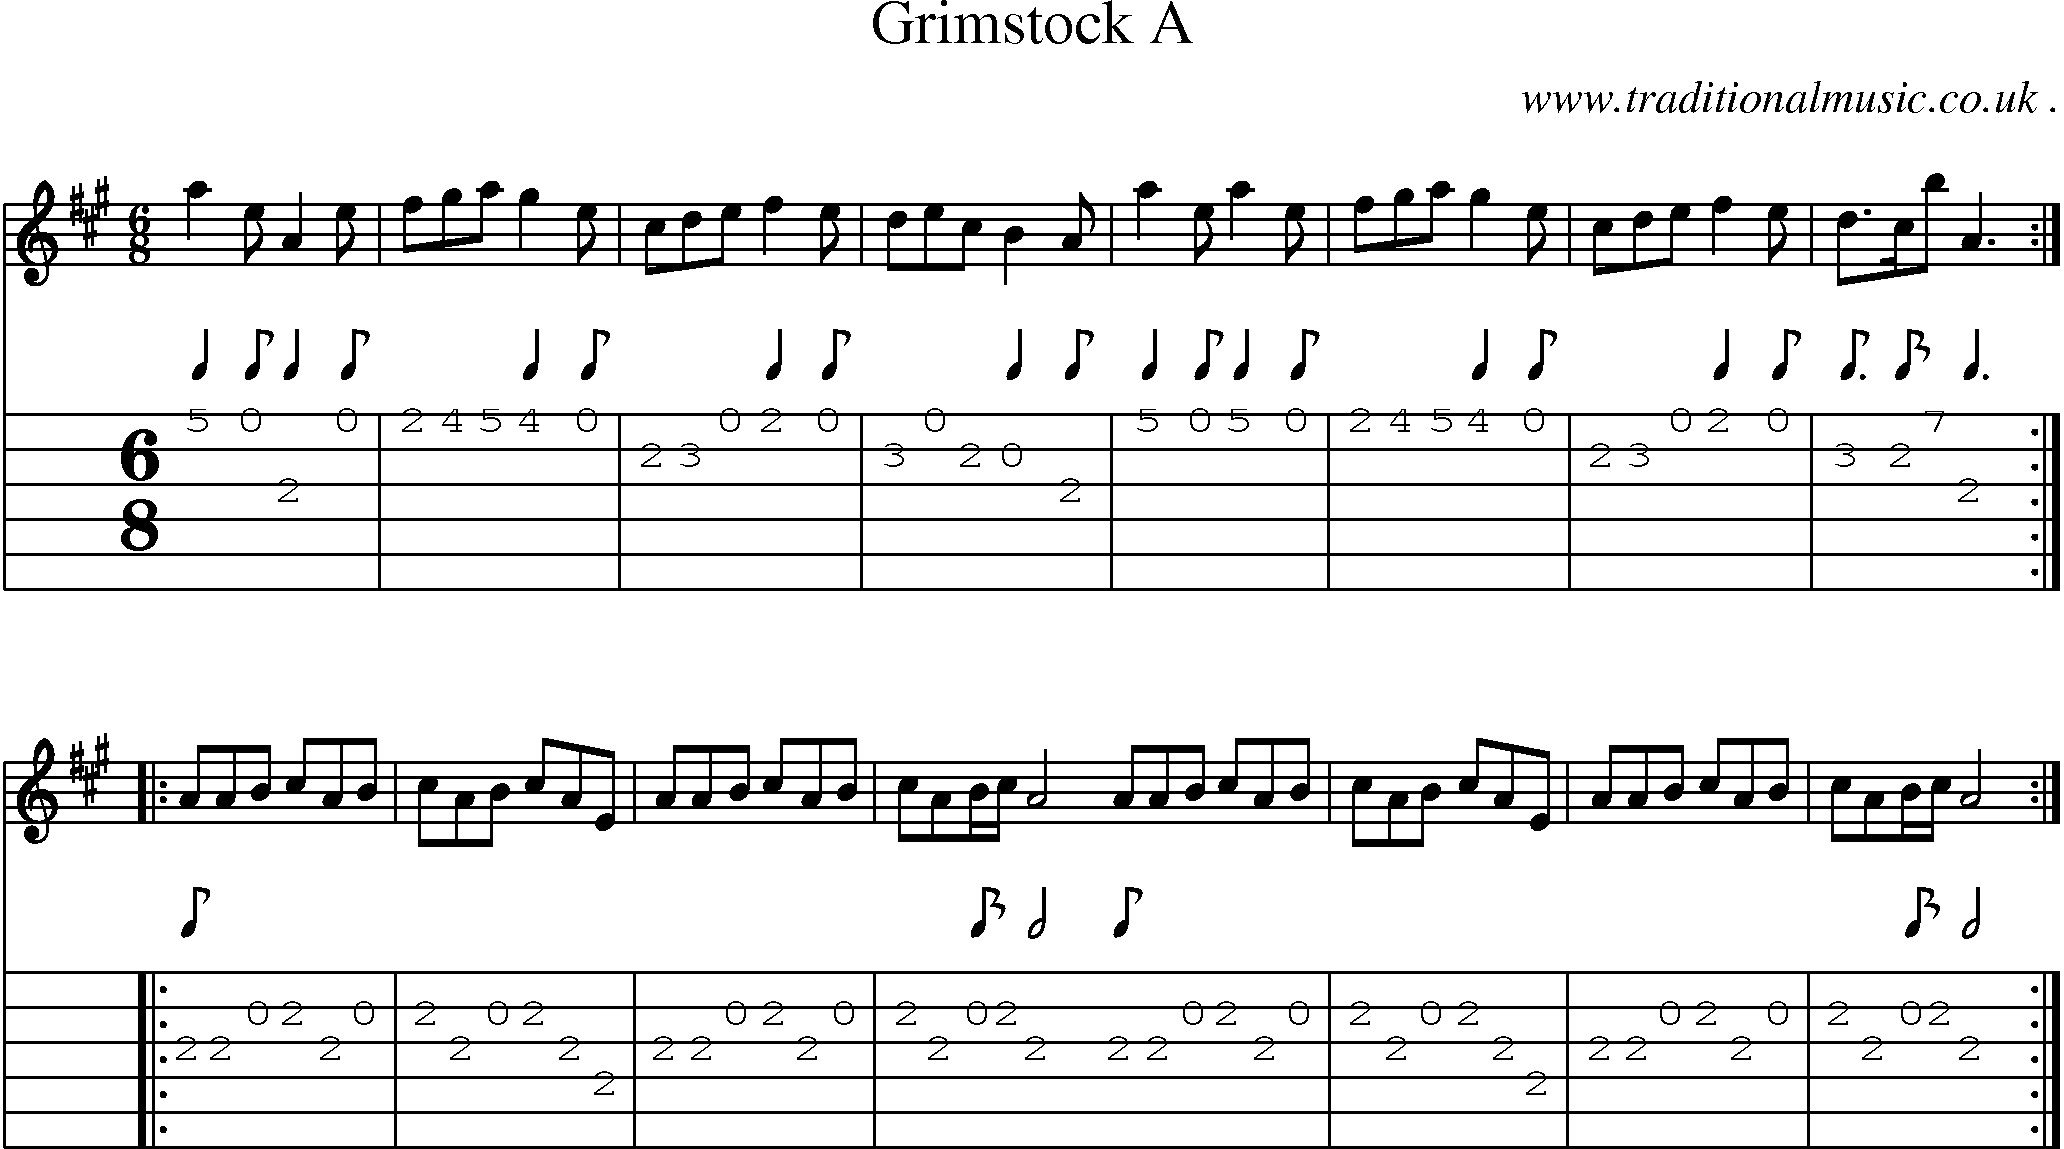 Sheet-Music and Guitar Tabs for Grimstock A